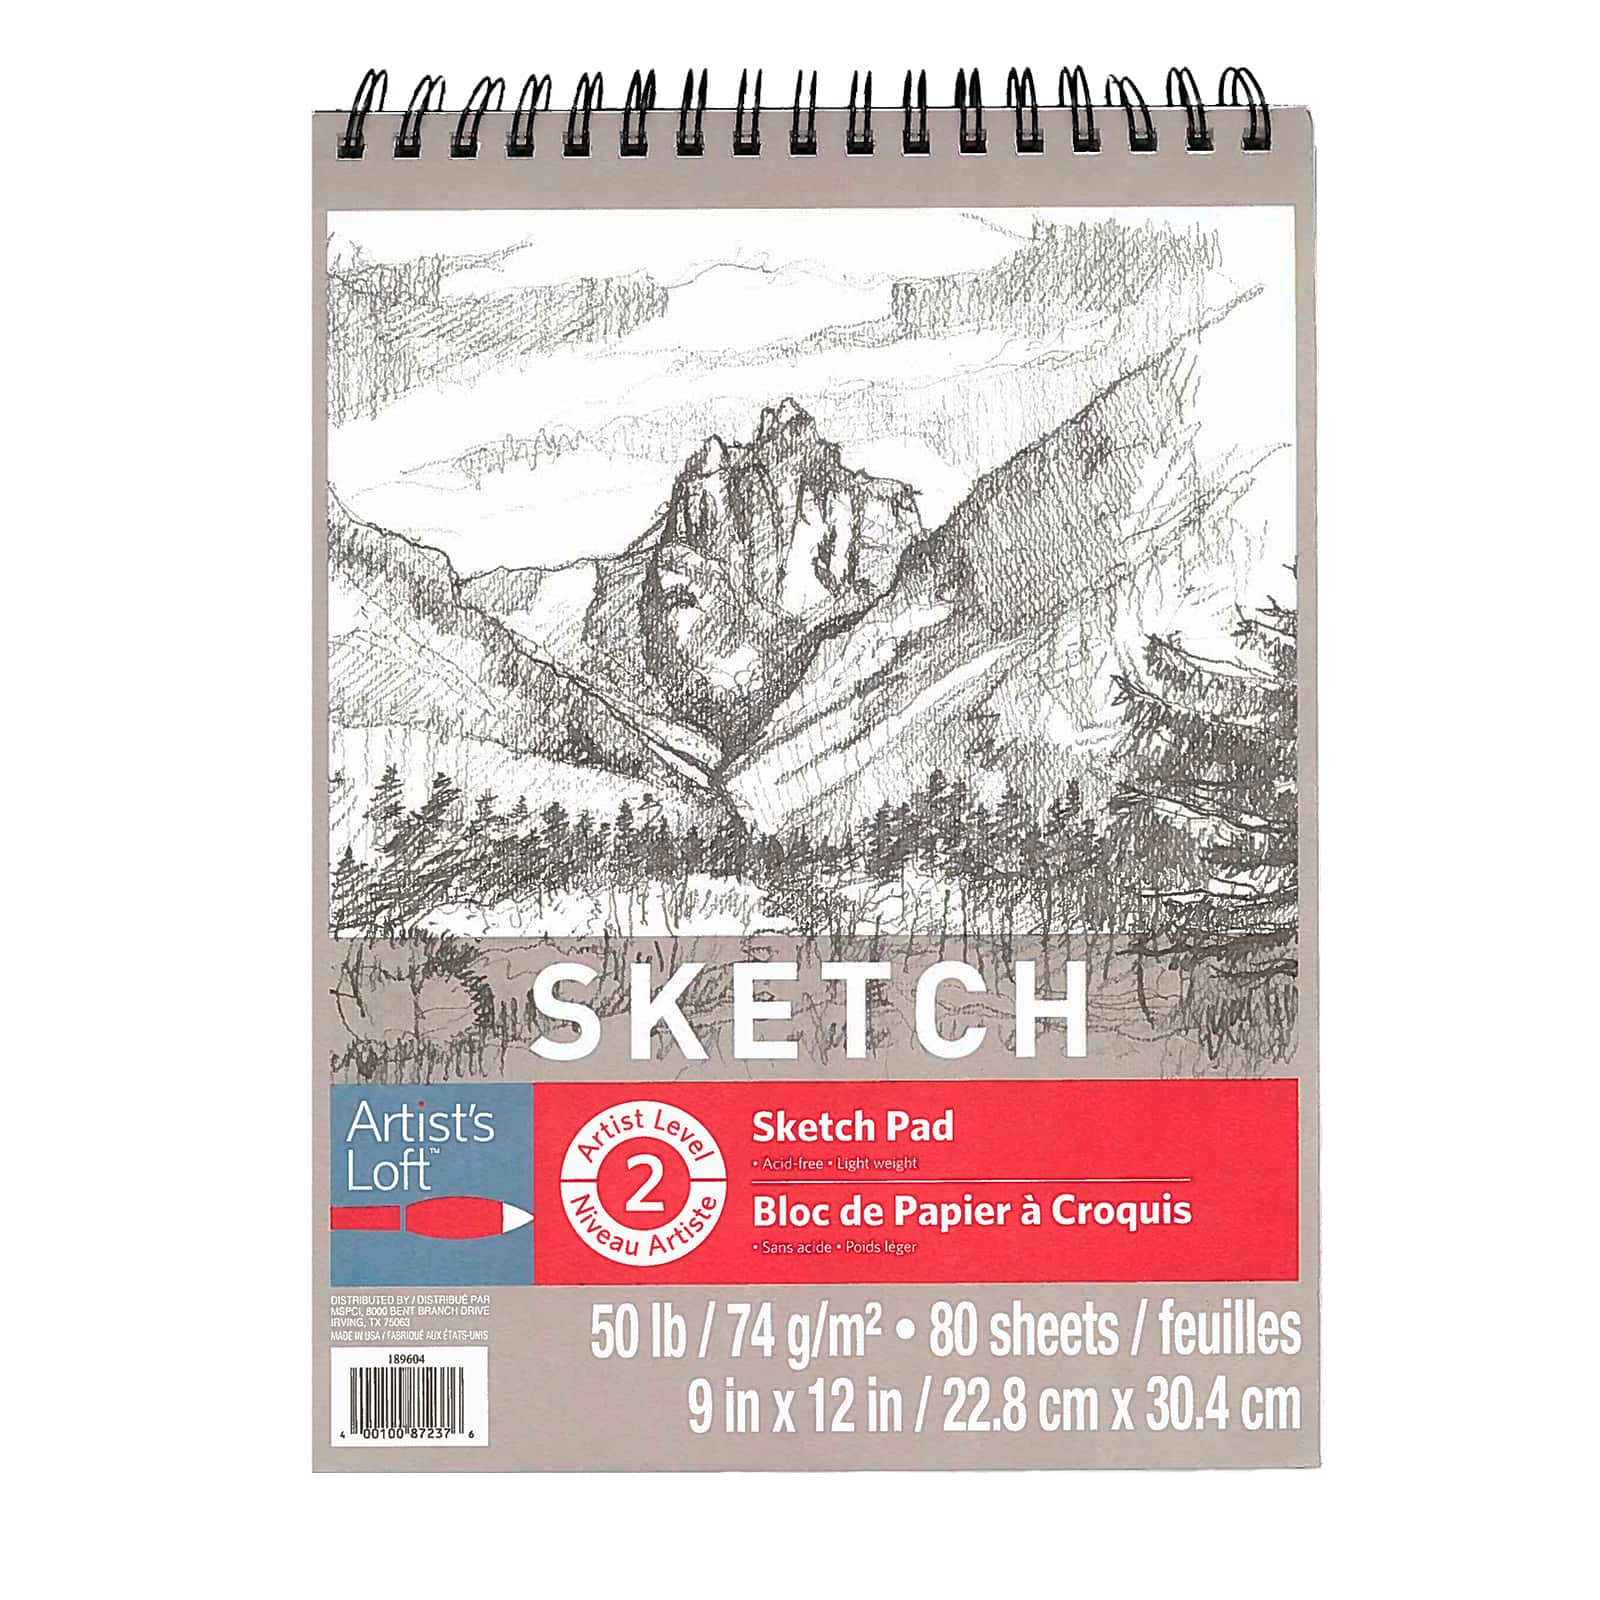 NEW-CHILDREN DRAWING PAD Sketch Art Artist Paper Book In Pack of 1,2,3,4 